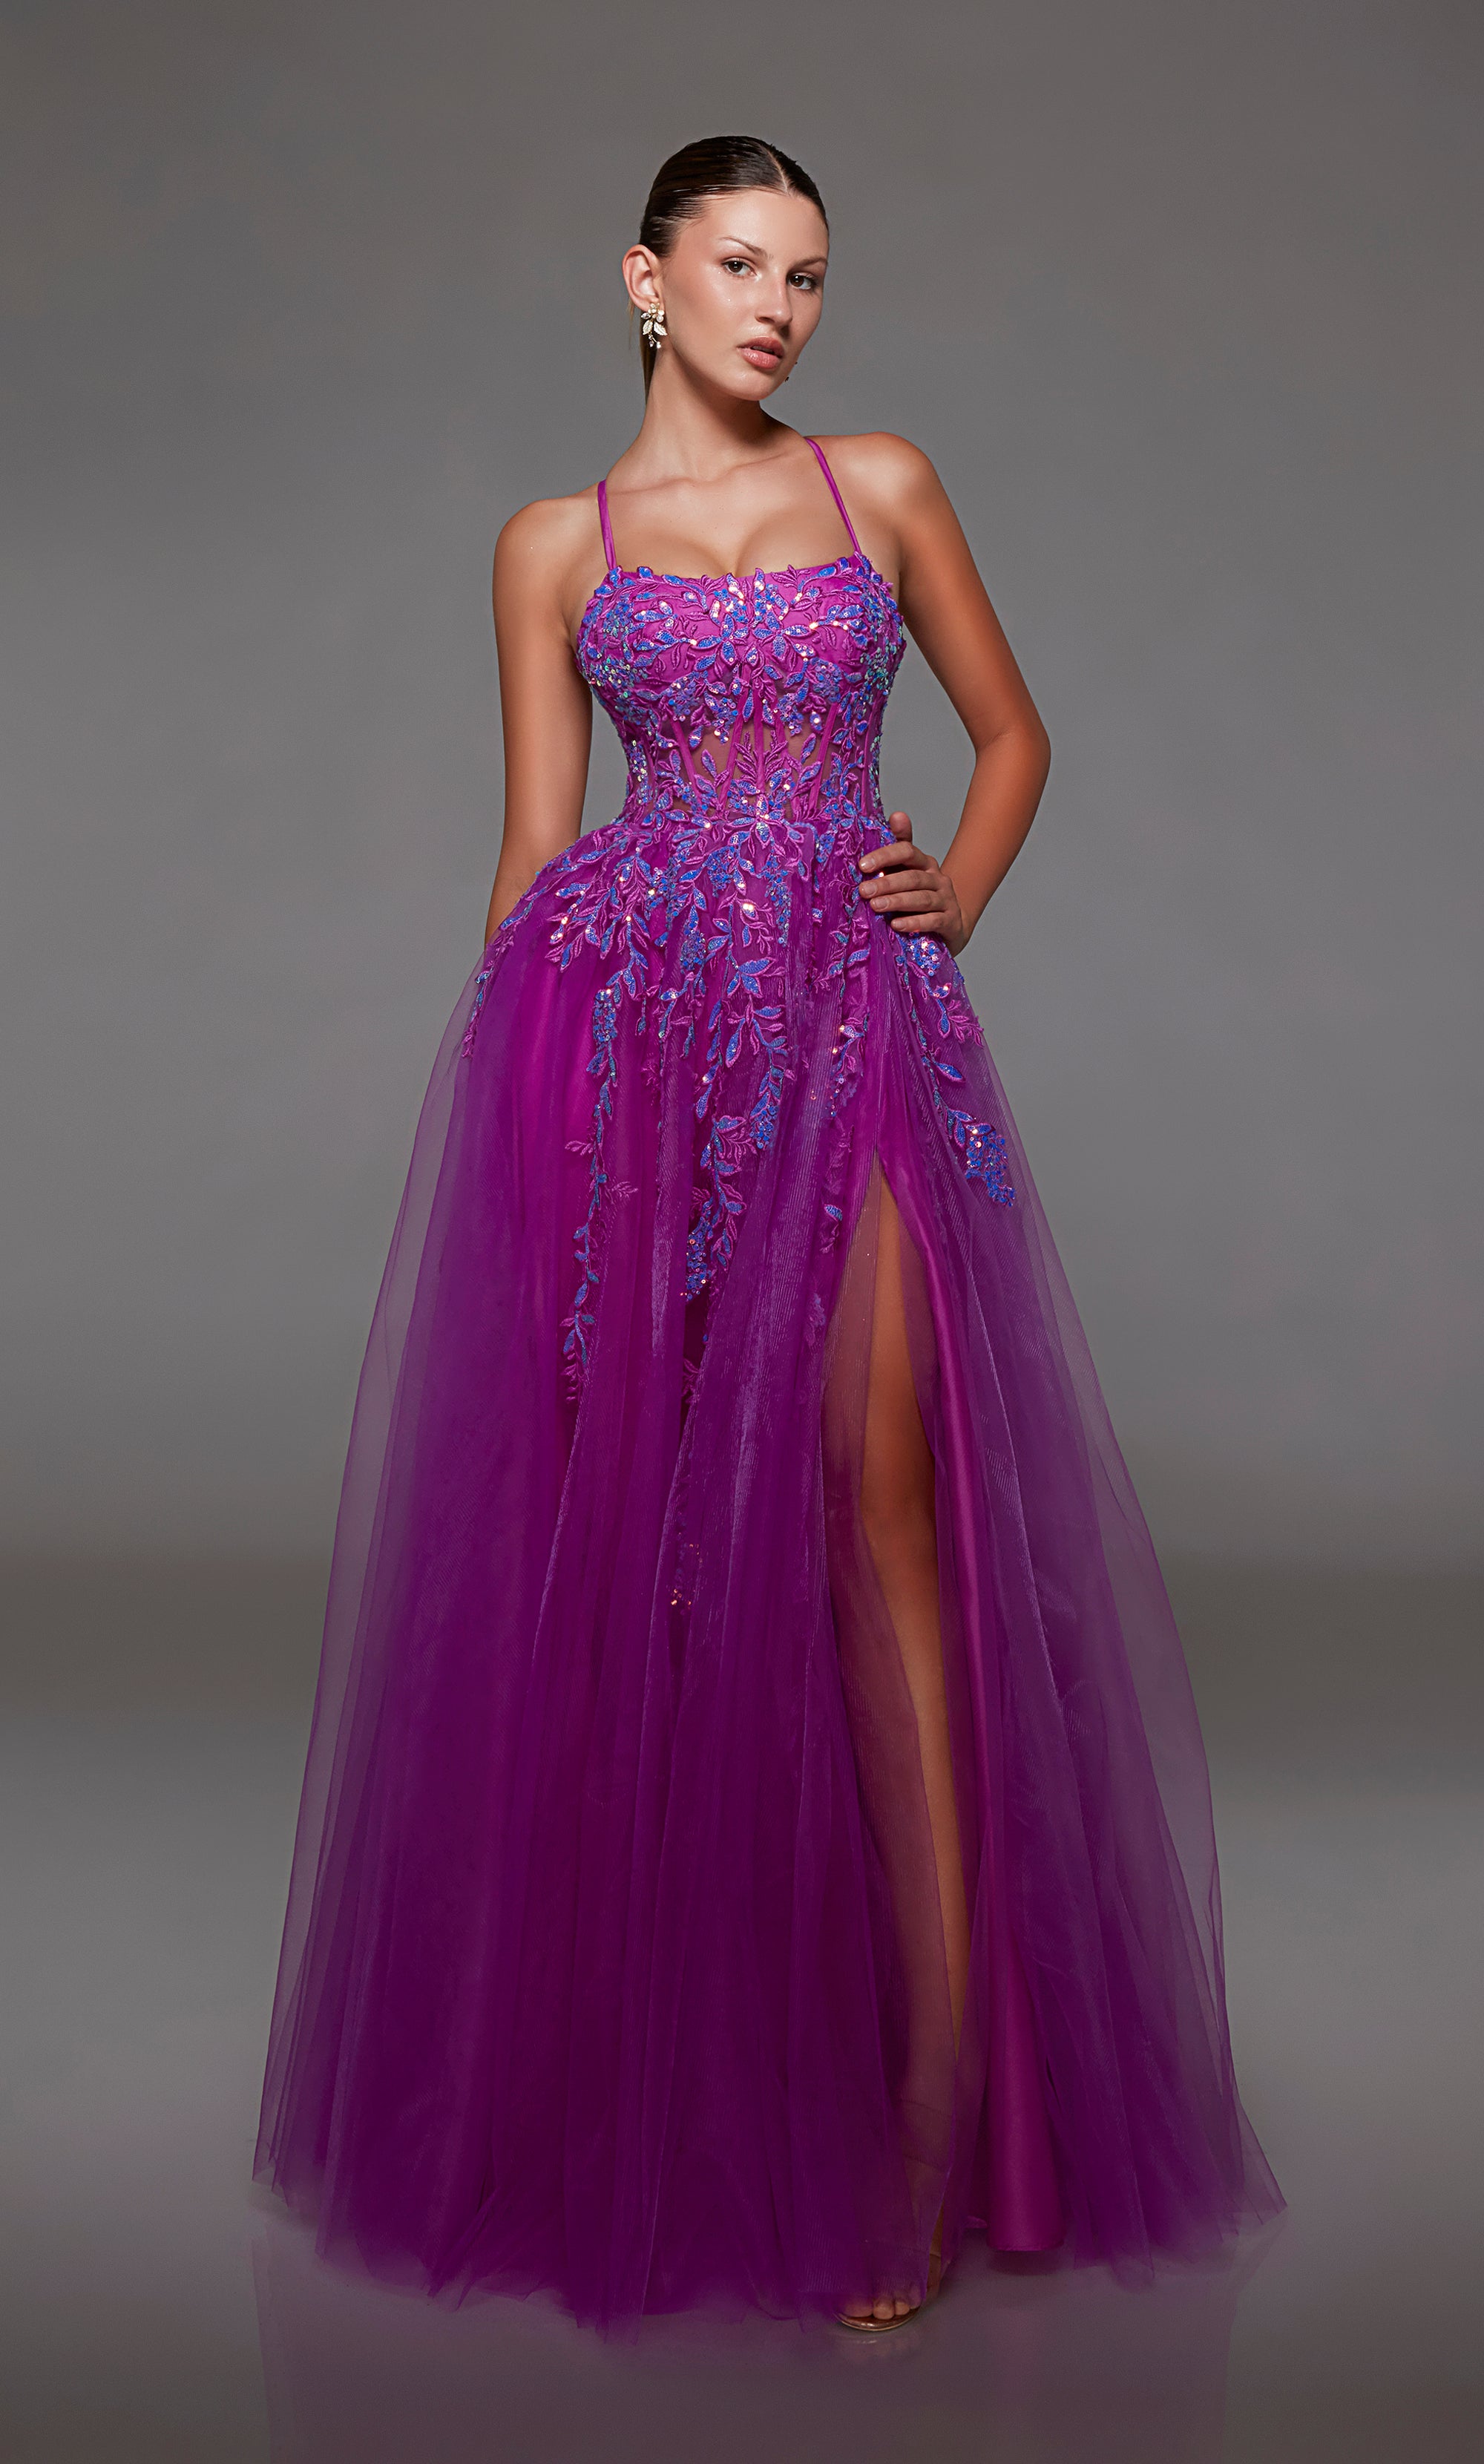 Purple prom dress: sheer corset bodice, full tulle skirt with front slit, lace-up back, and intricate floral lace appliques for an enchanting look.